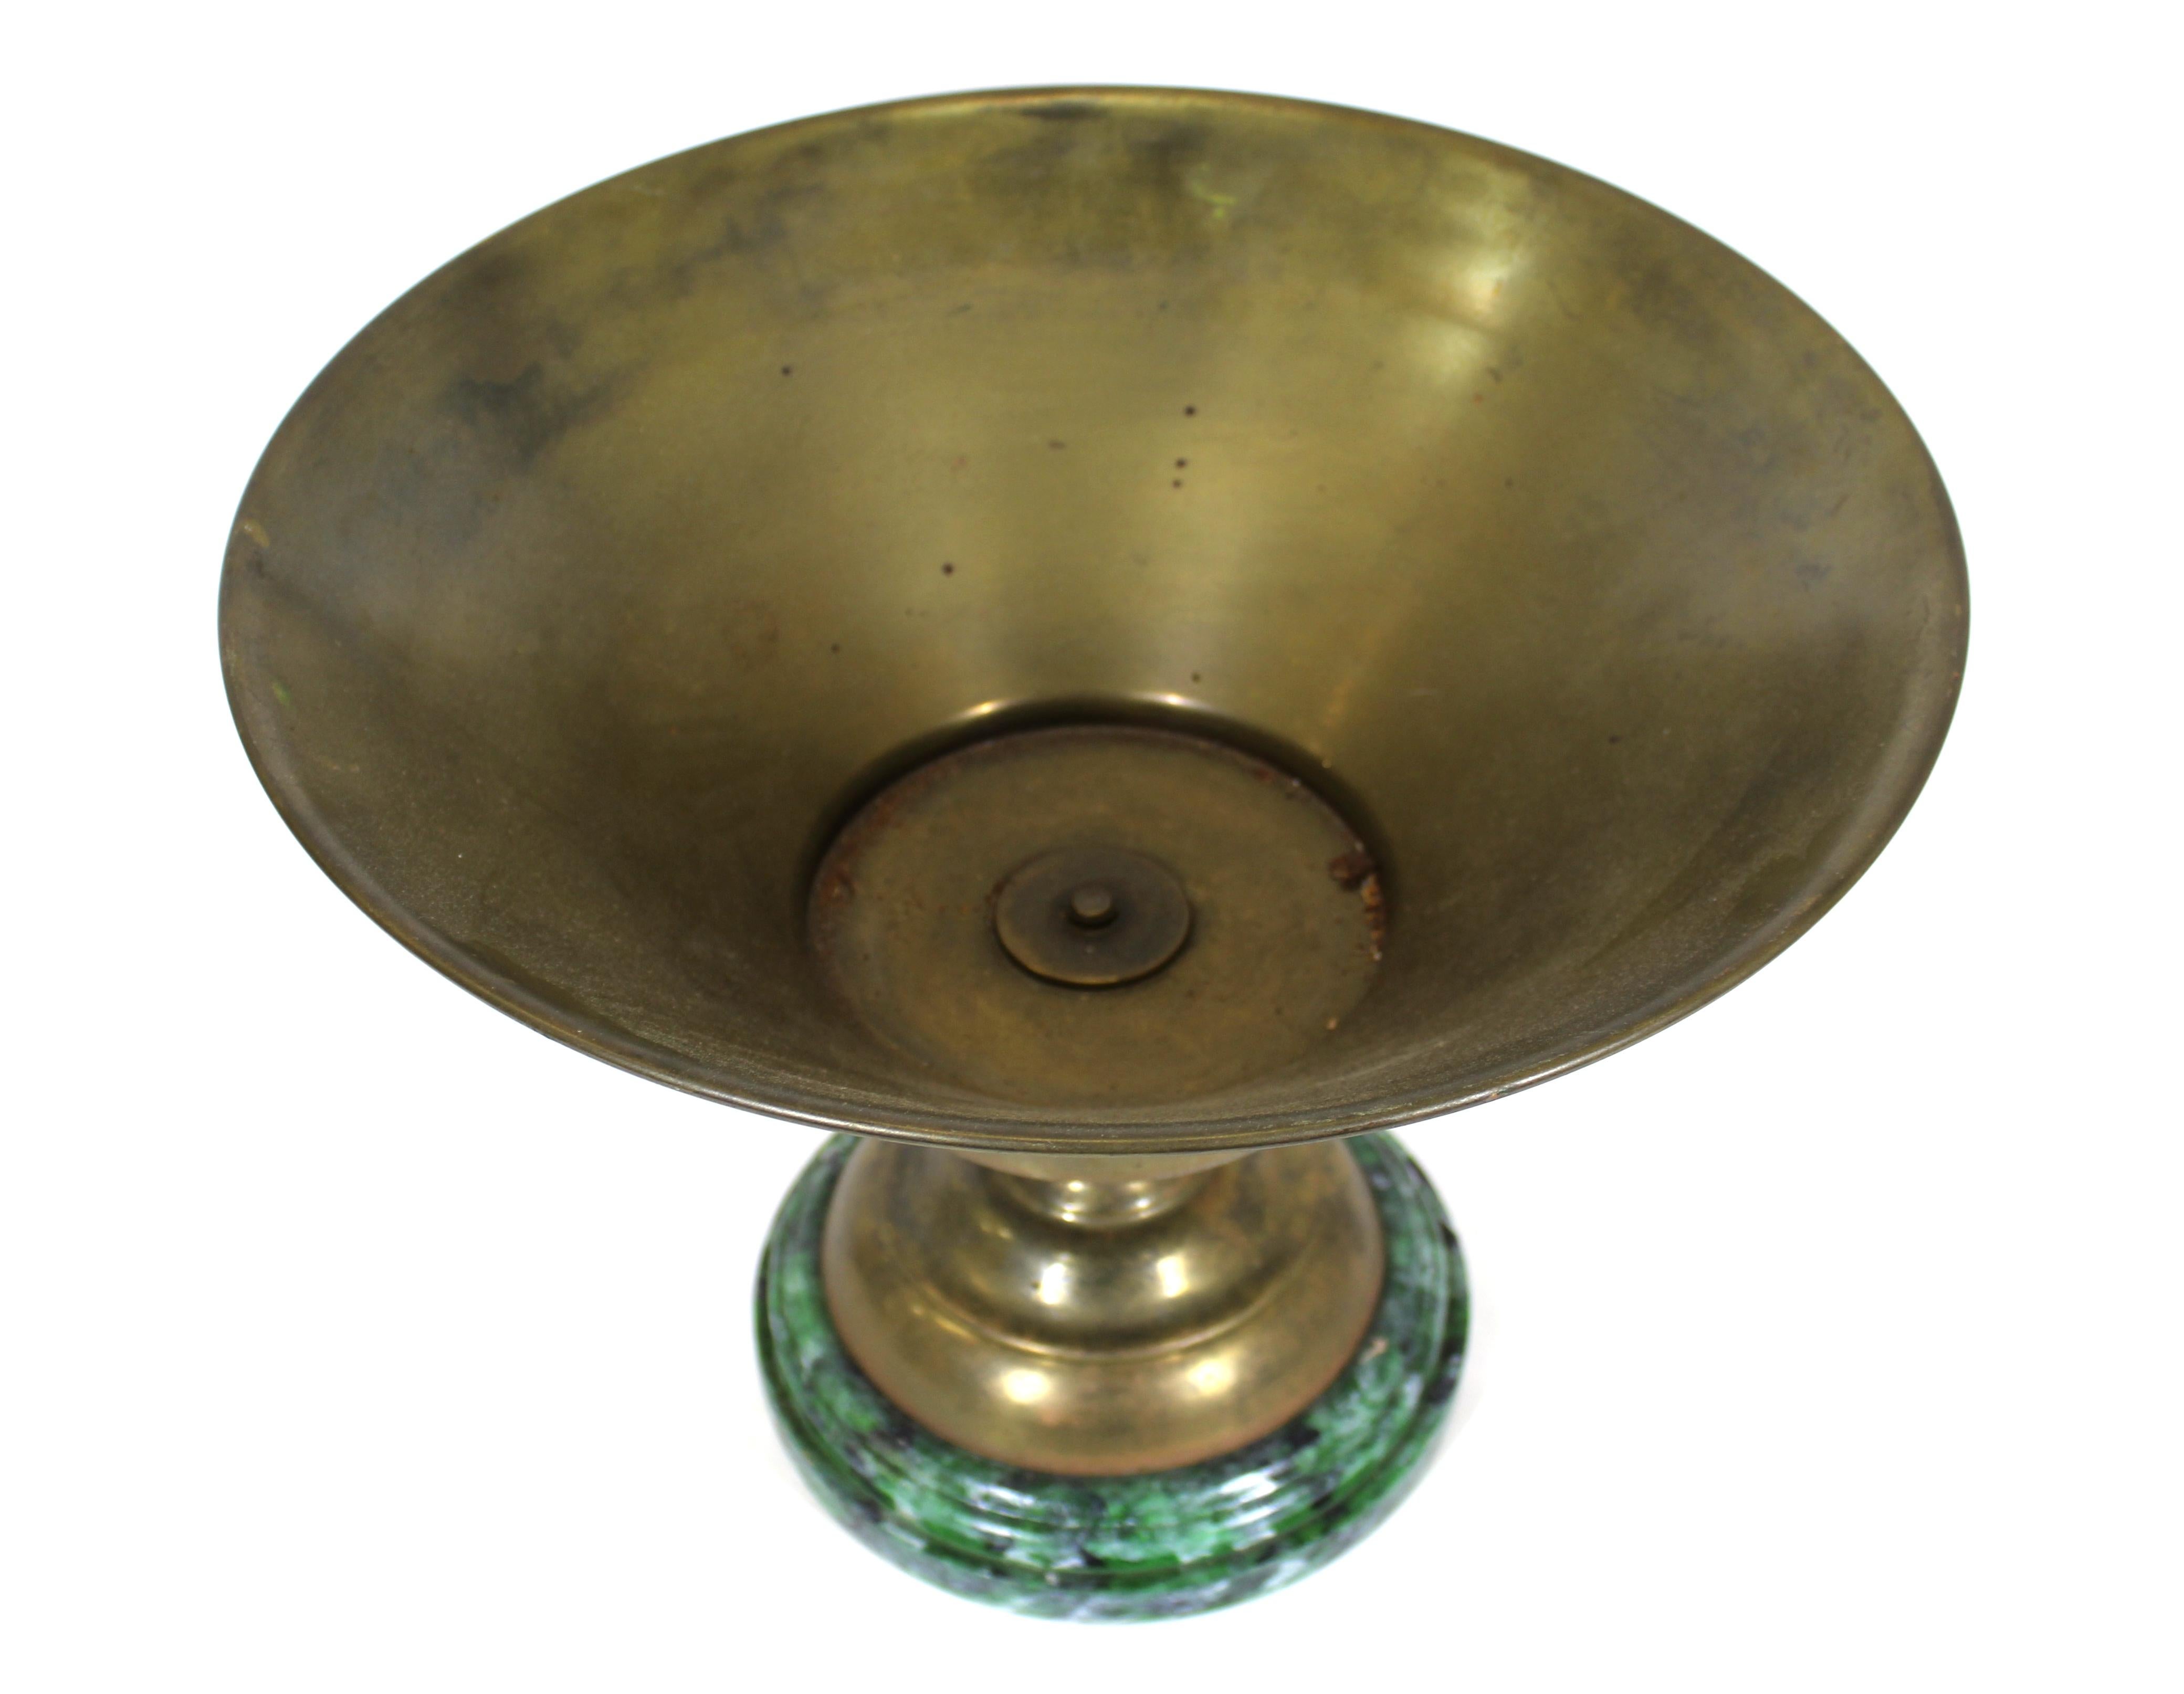 20th Century Neoclassical Revival Style Brass Jardinière For Sale